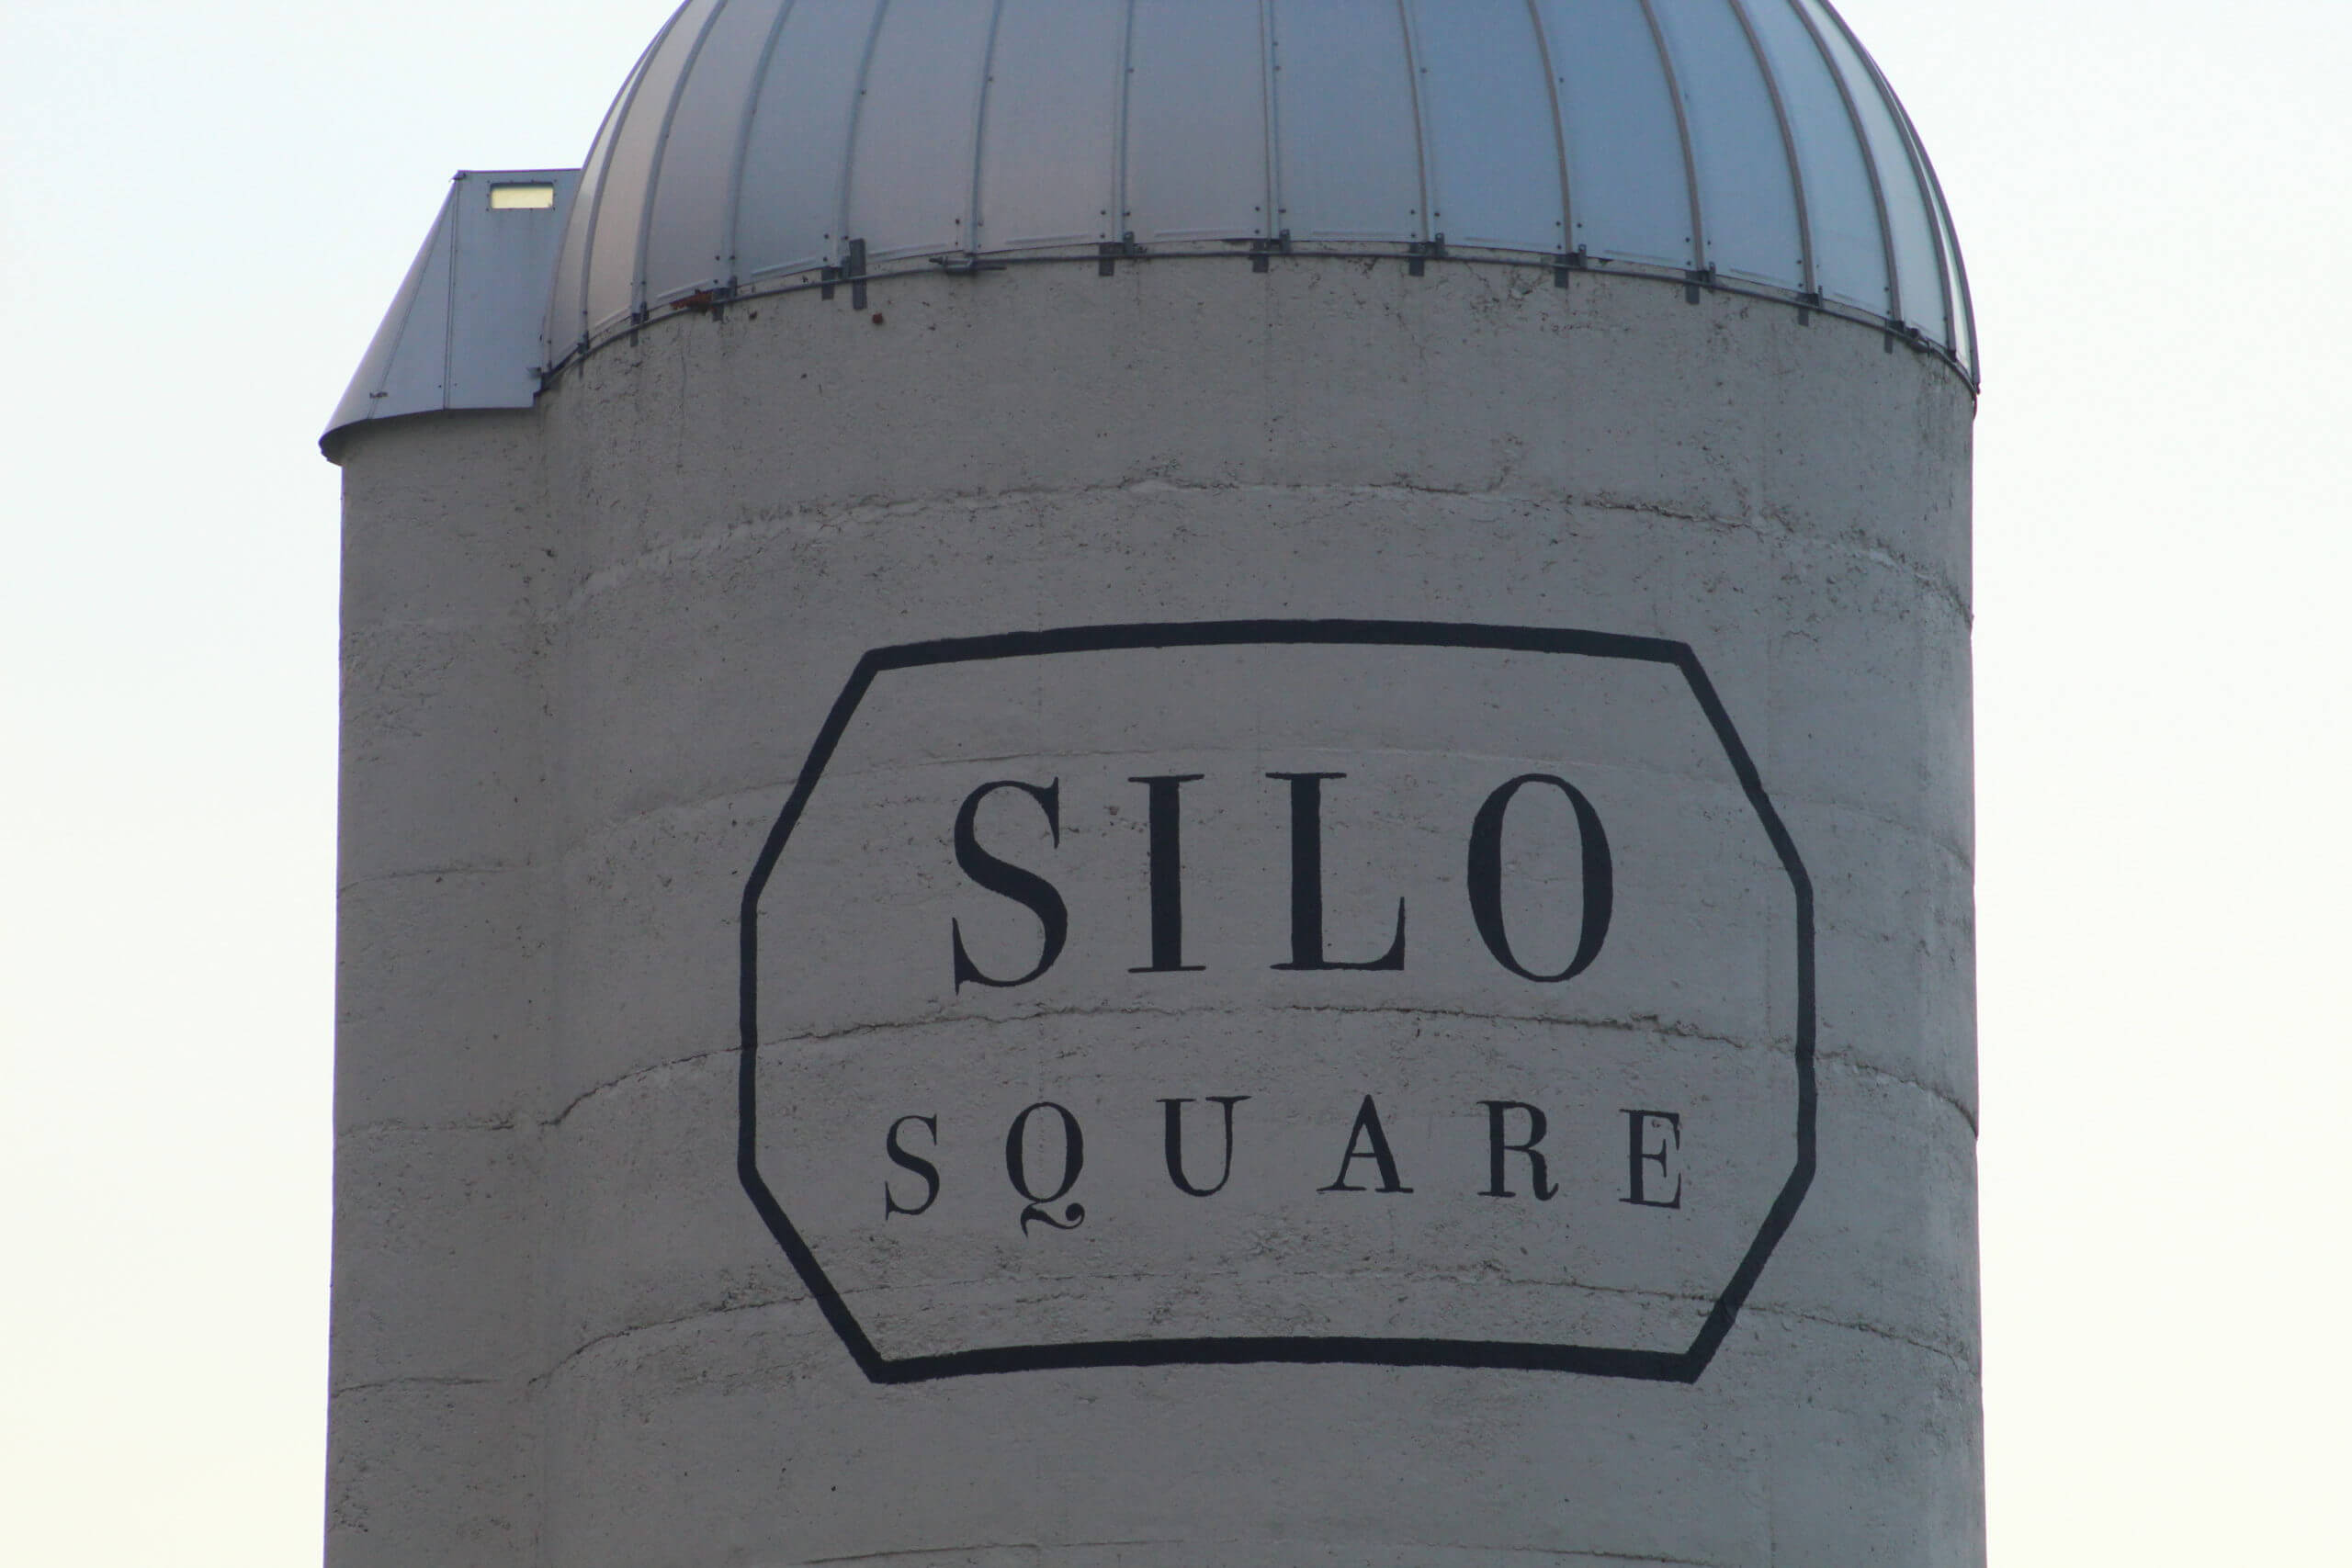 Silo Square to hold Blues for the Blue Festival